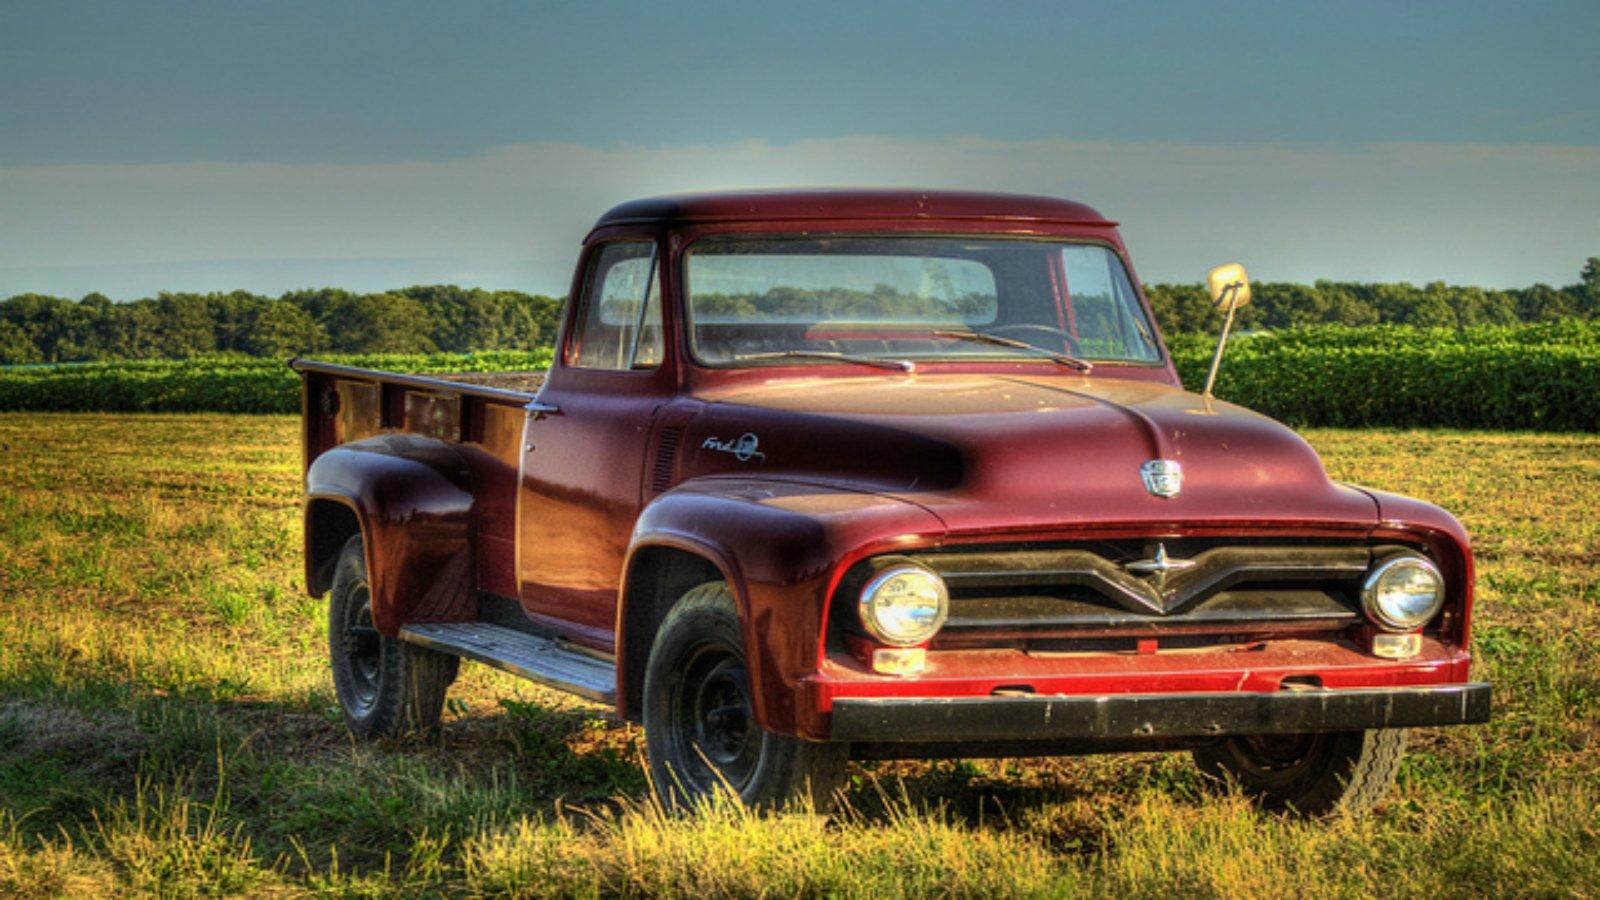 Old Ford Truck Wallpapers - Top Free Old Ford Truck Backgrounds